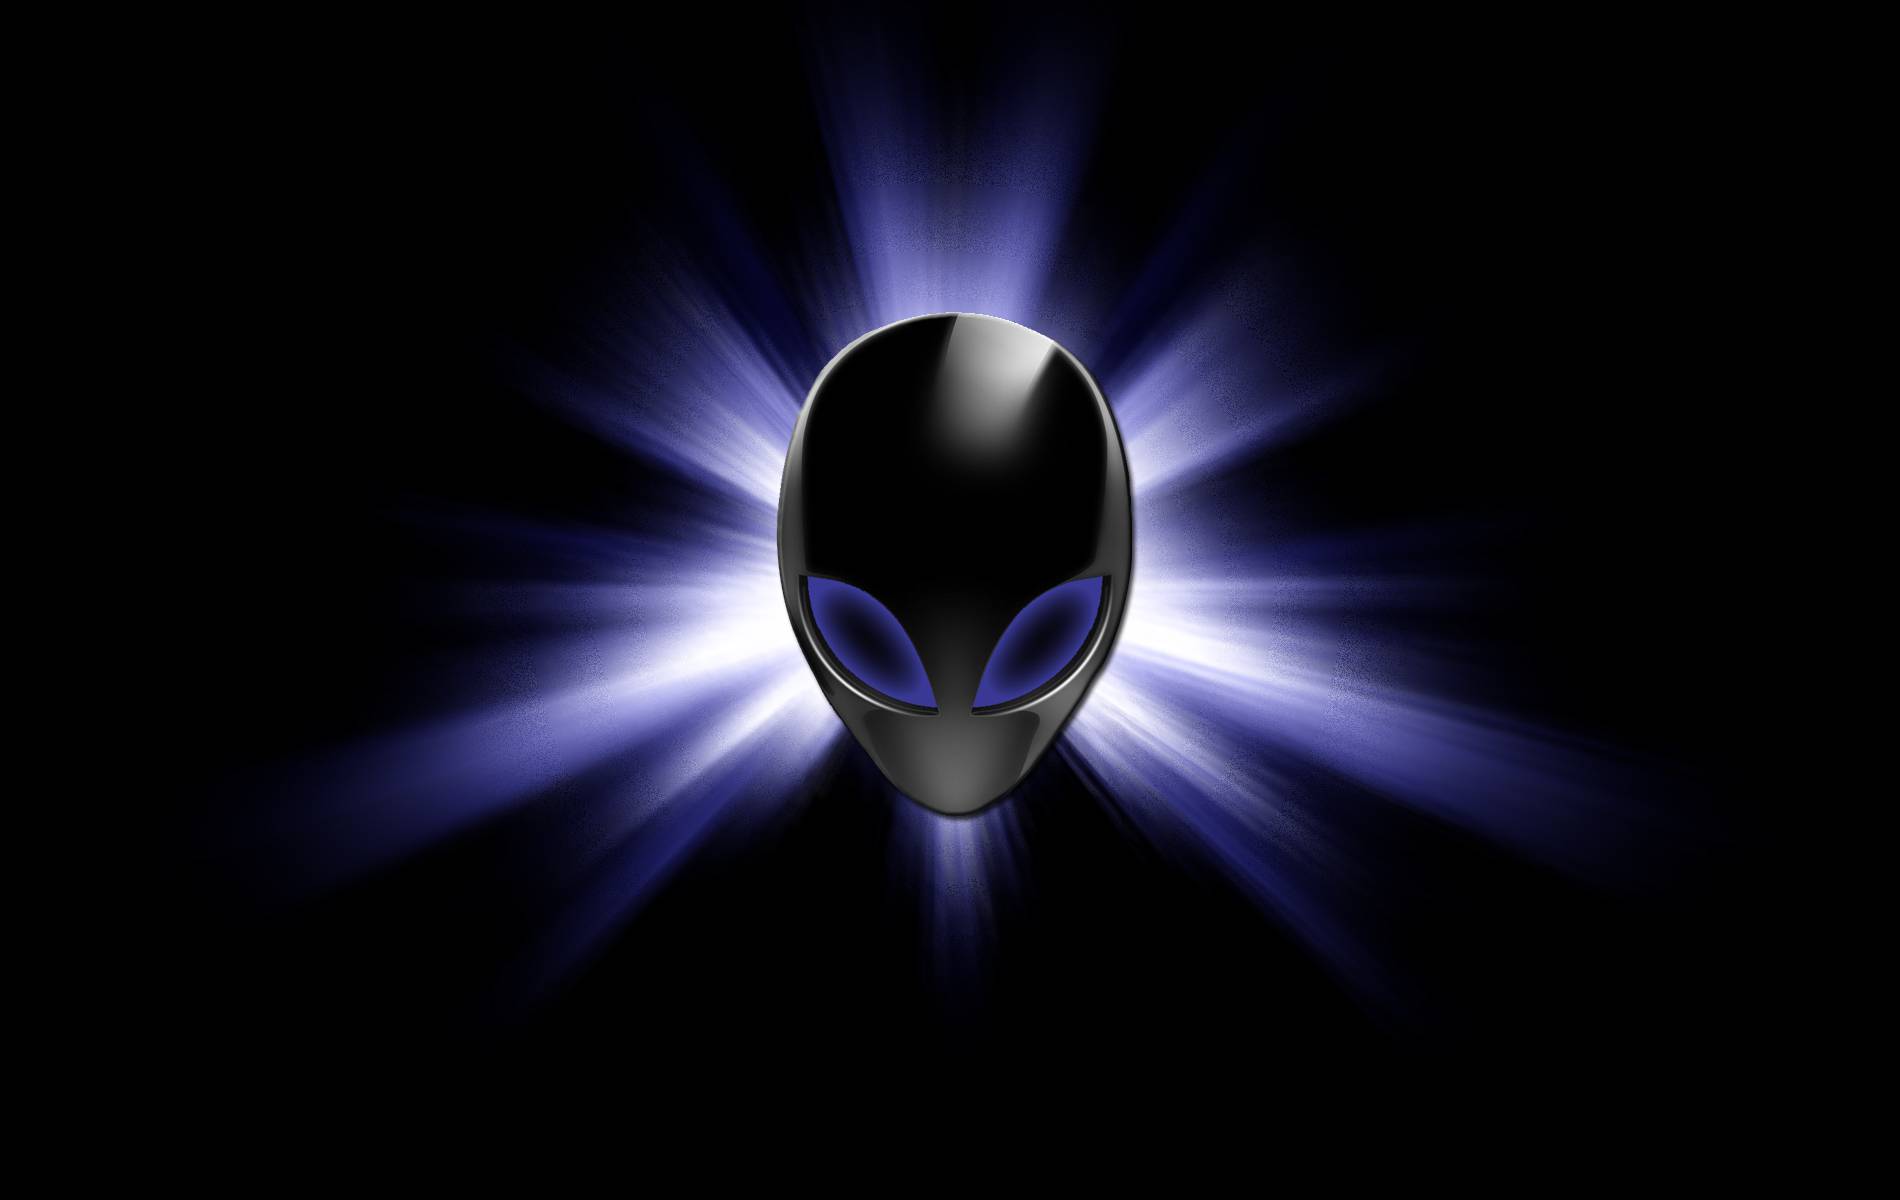 Ws alienware alienware wallpaper - (#23841) - High Quality and ...